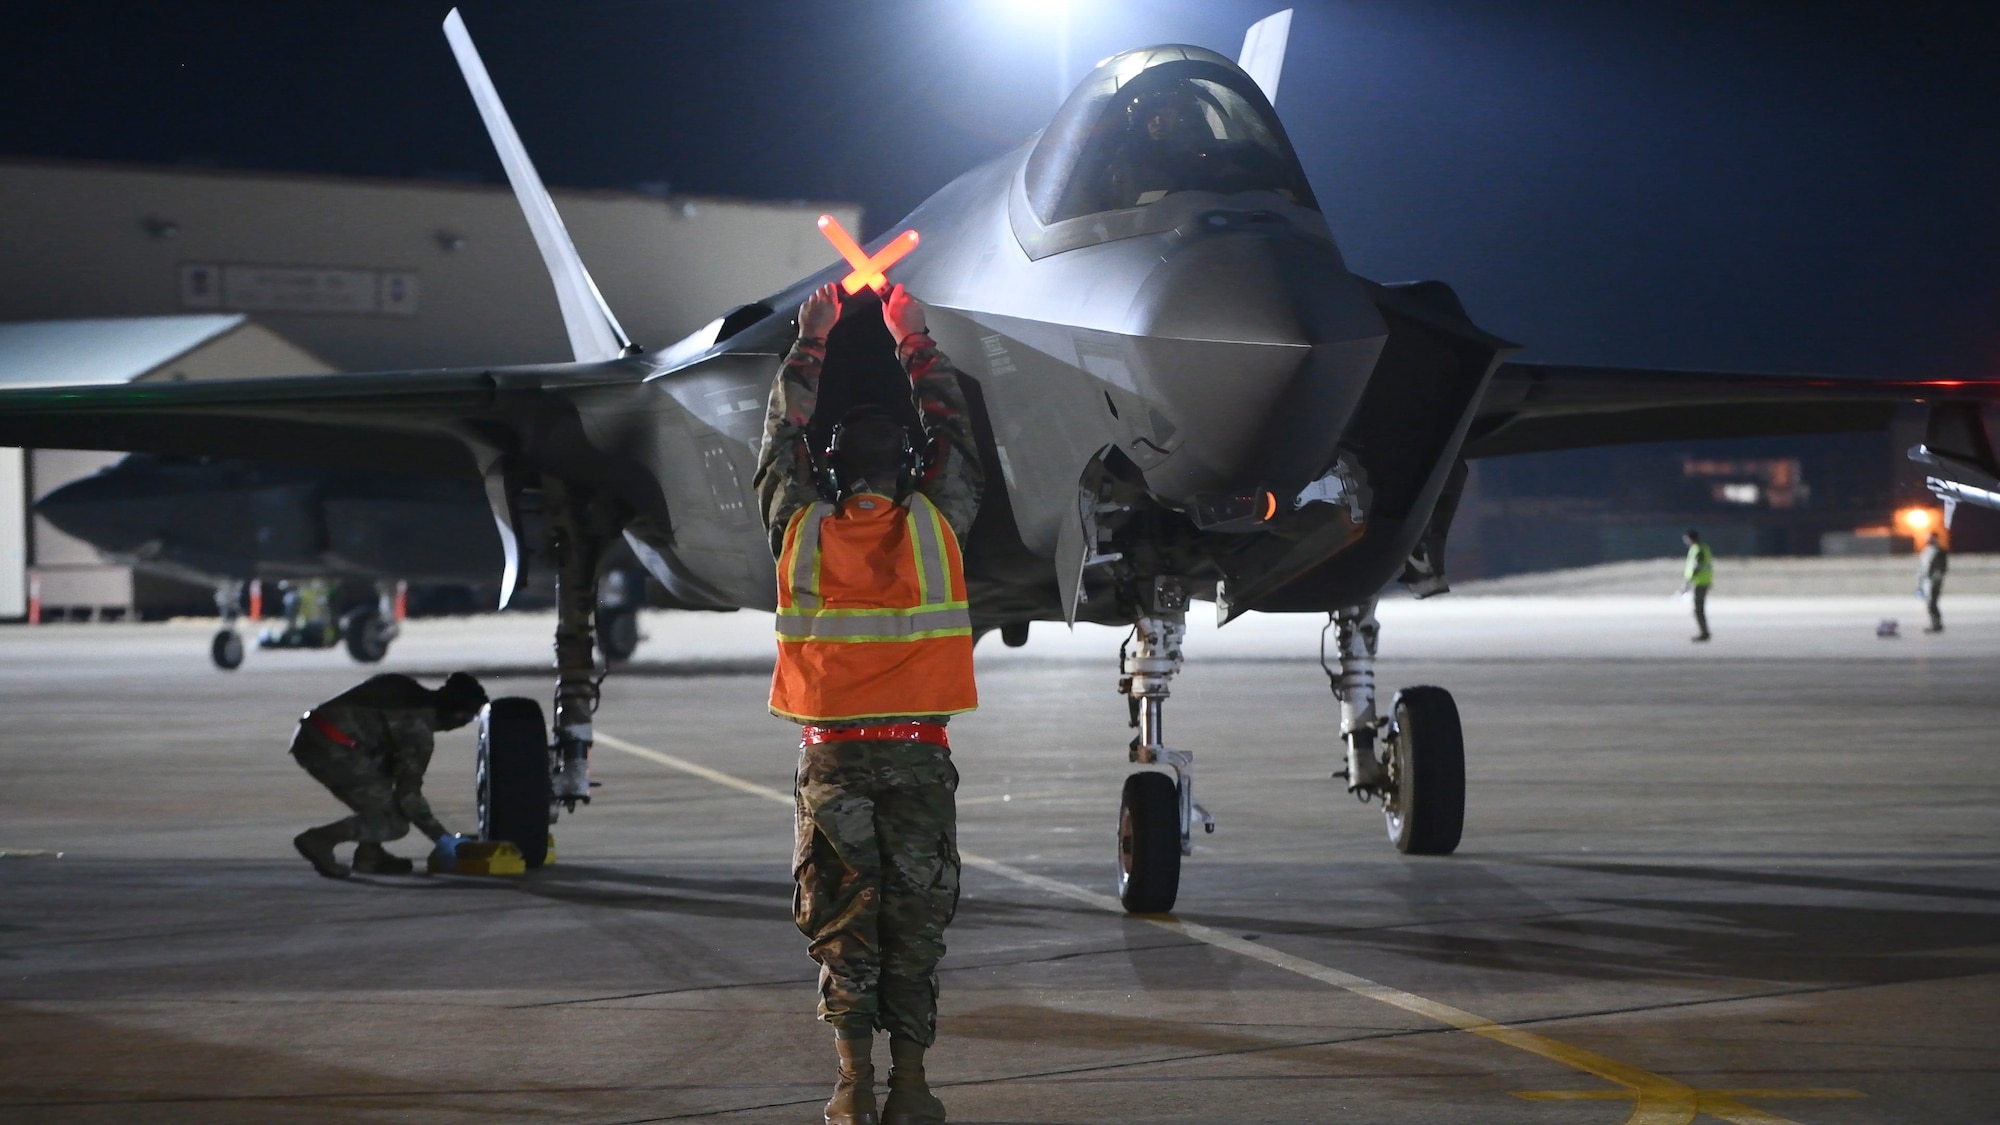 An Airman directs an F-35A Lightning II pilot to stop for a hot pit refuel with the aid of marshalling wands